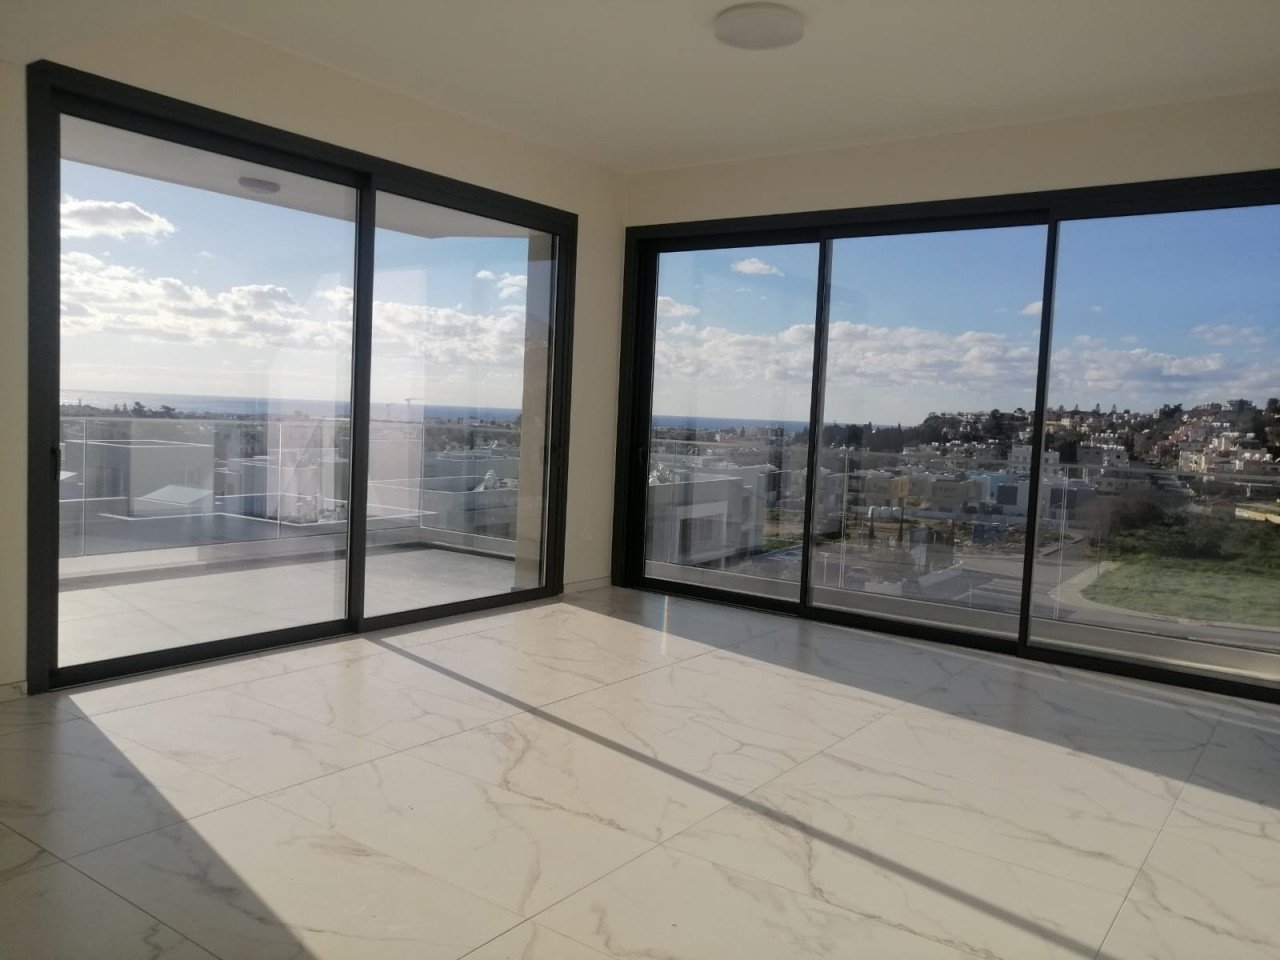 Property for Rent: Apartment (Penthouse) in Universal, Paphos for Rent | Key Realtor Cyprus